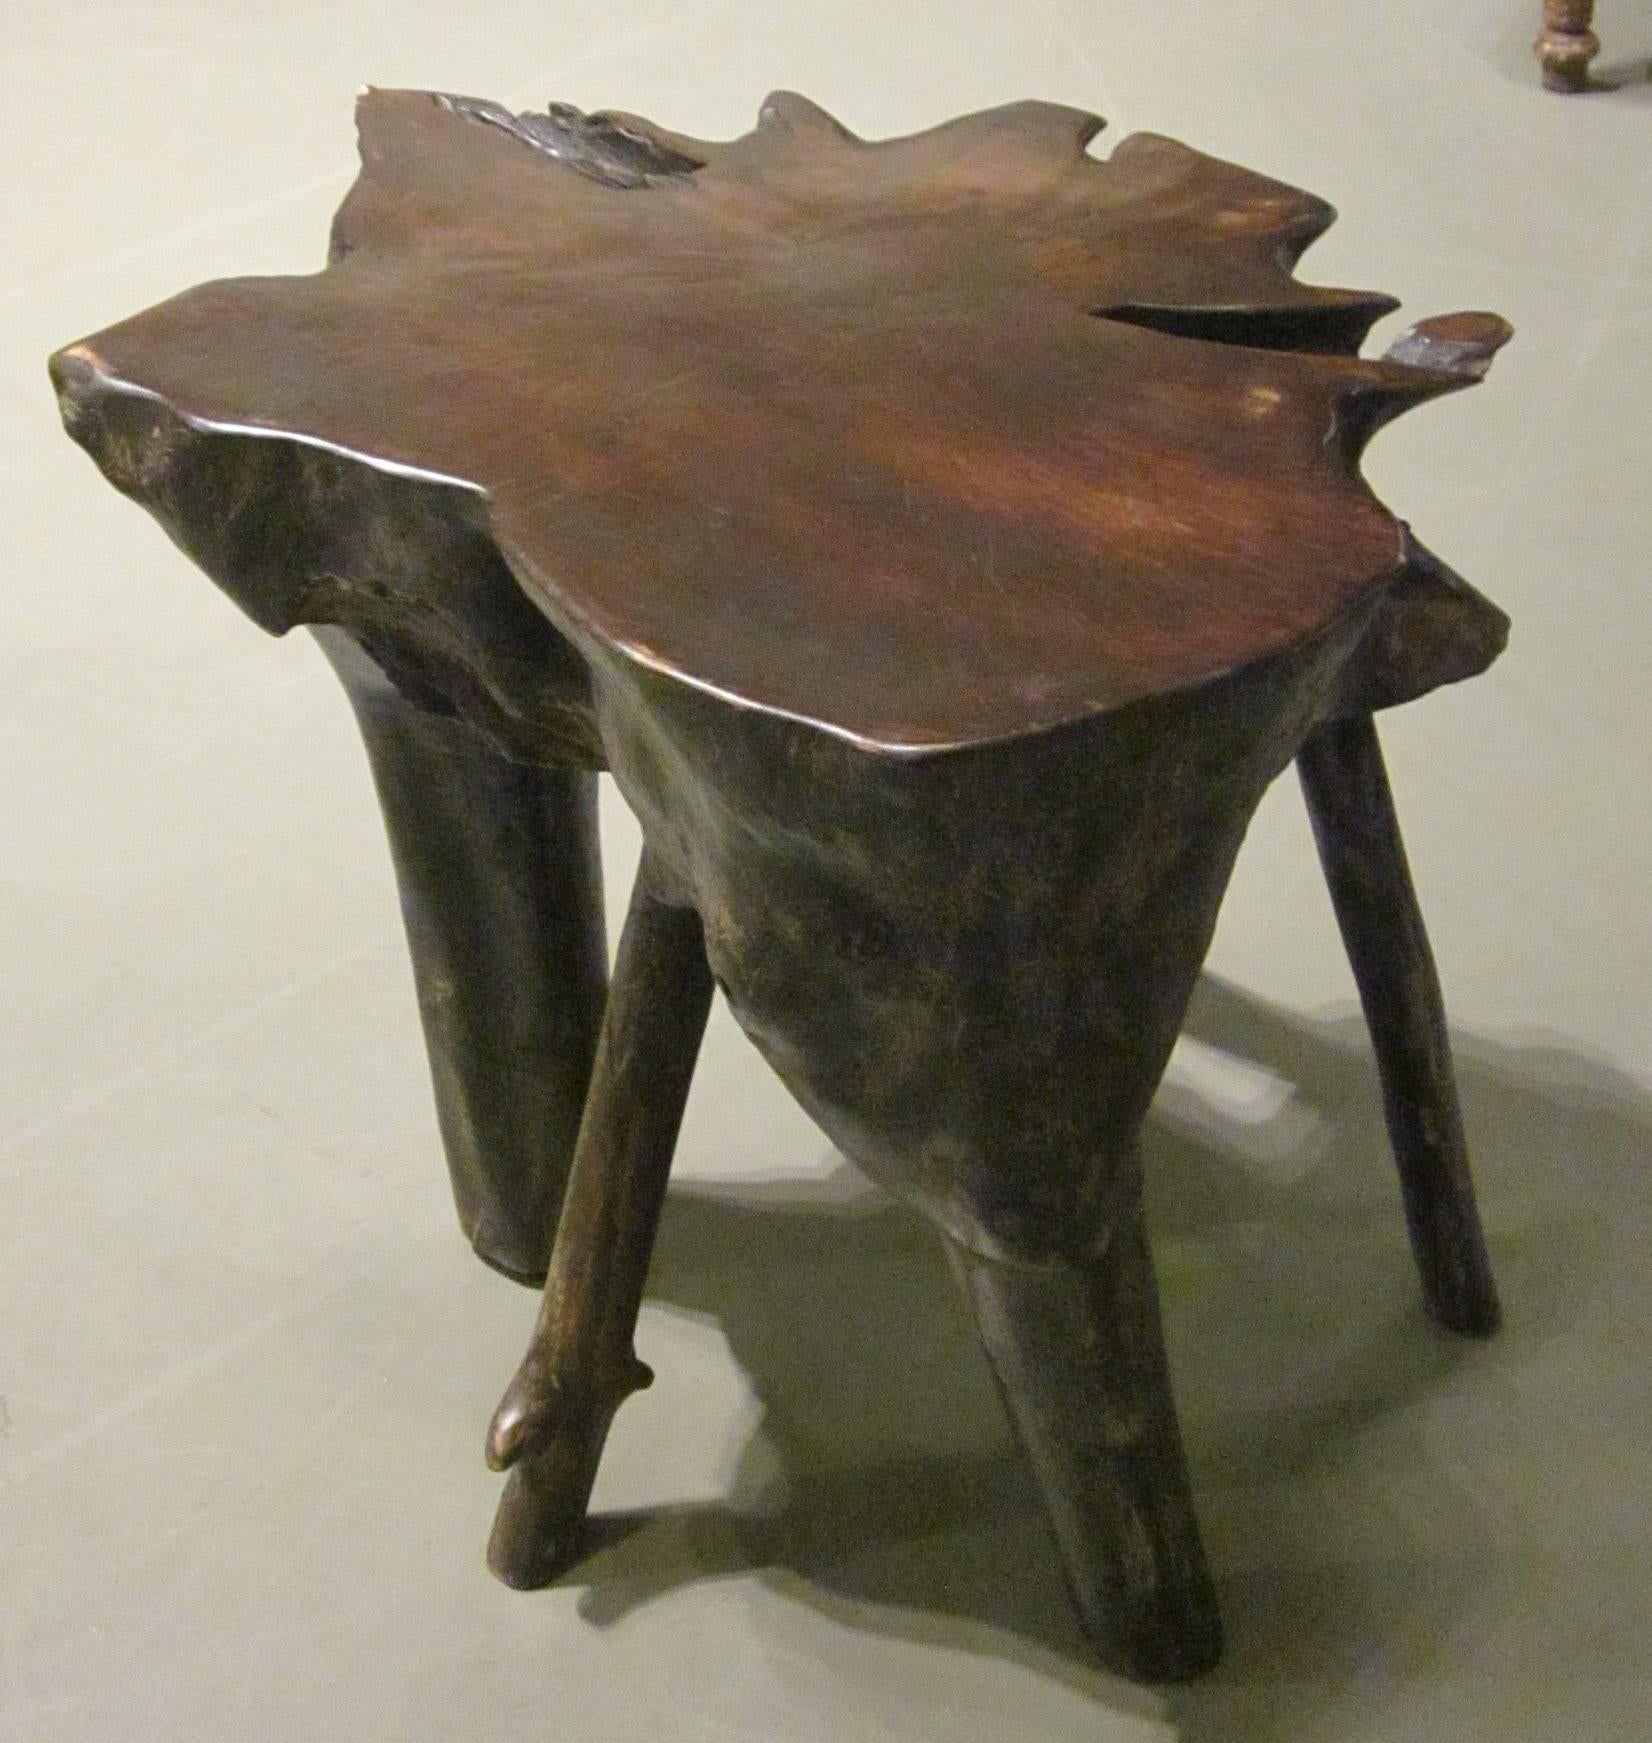 Contemporary Indonesian lychee wood multi leg cocktail table.
This organic, free-form shaped table has five legs.
The top is smooth, sides and legs are textured.
   